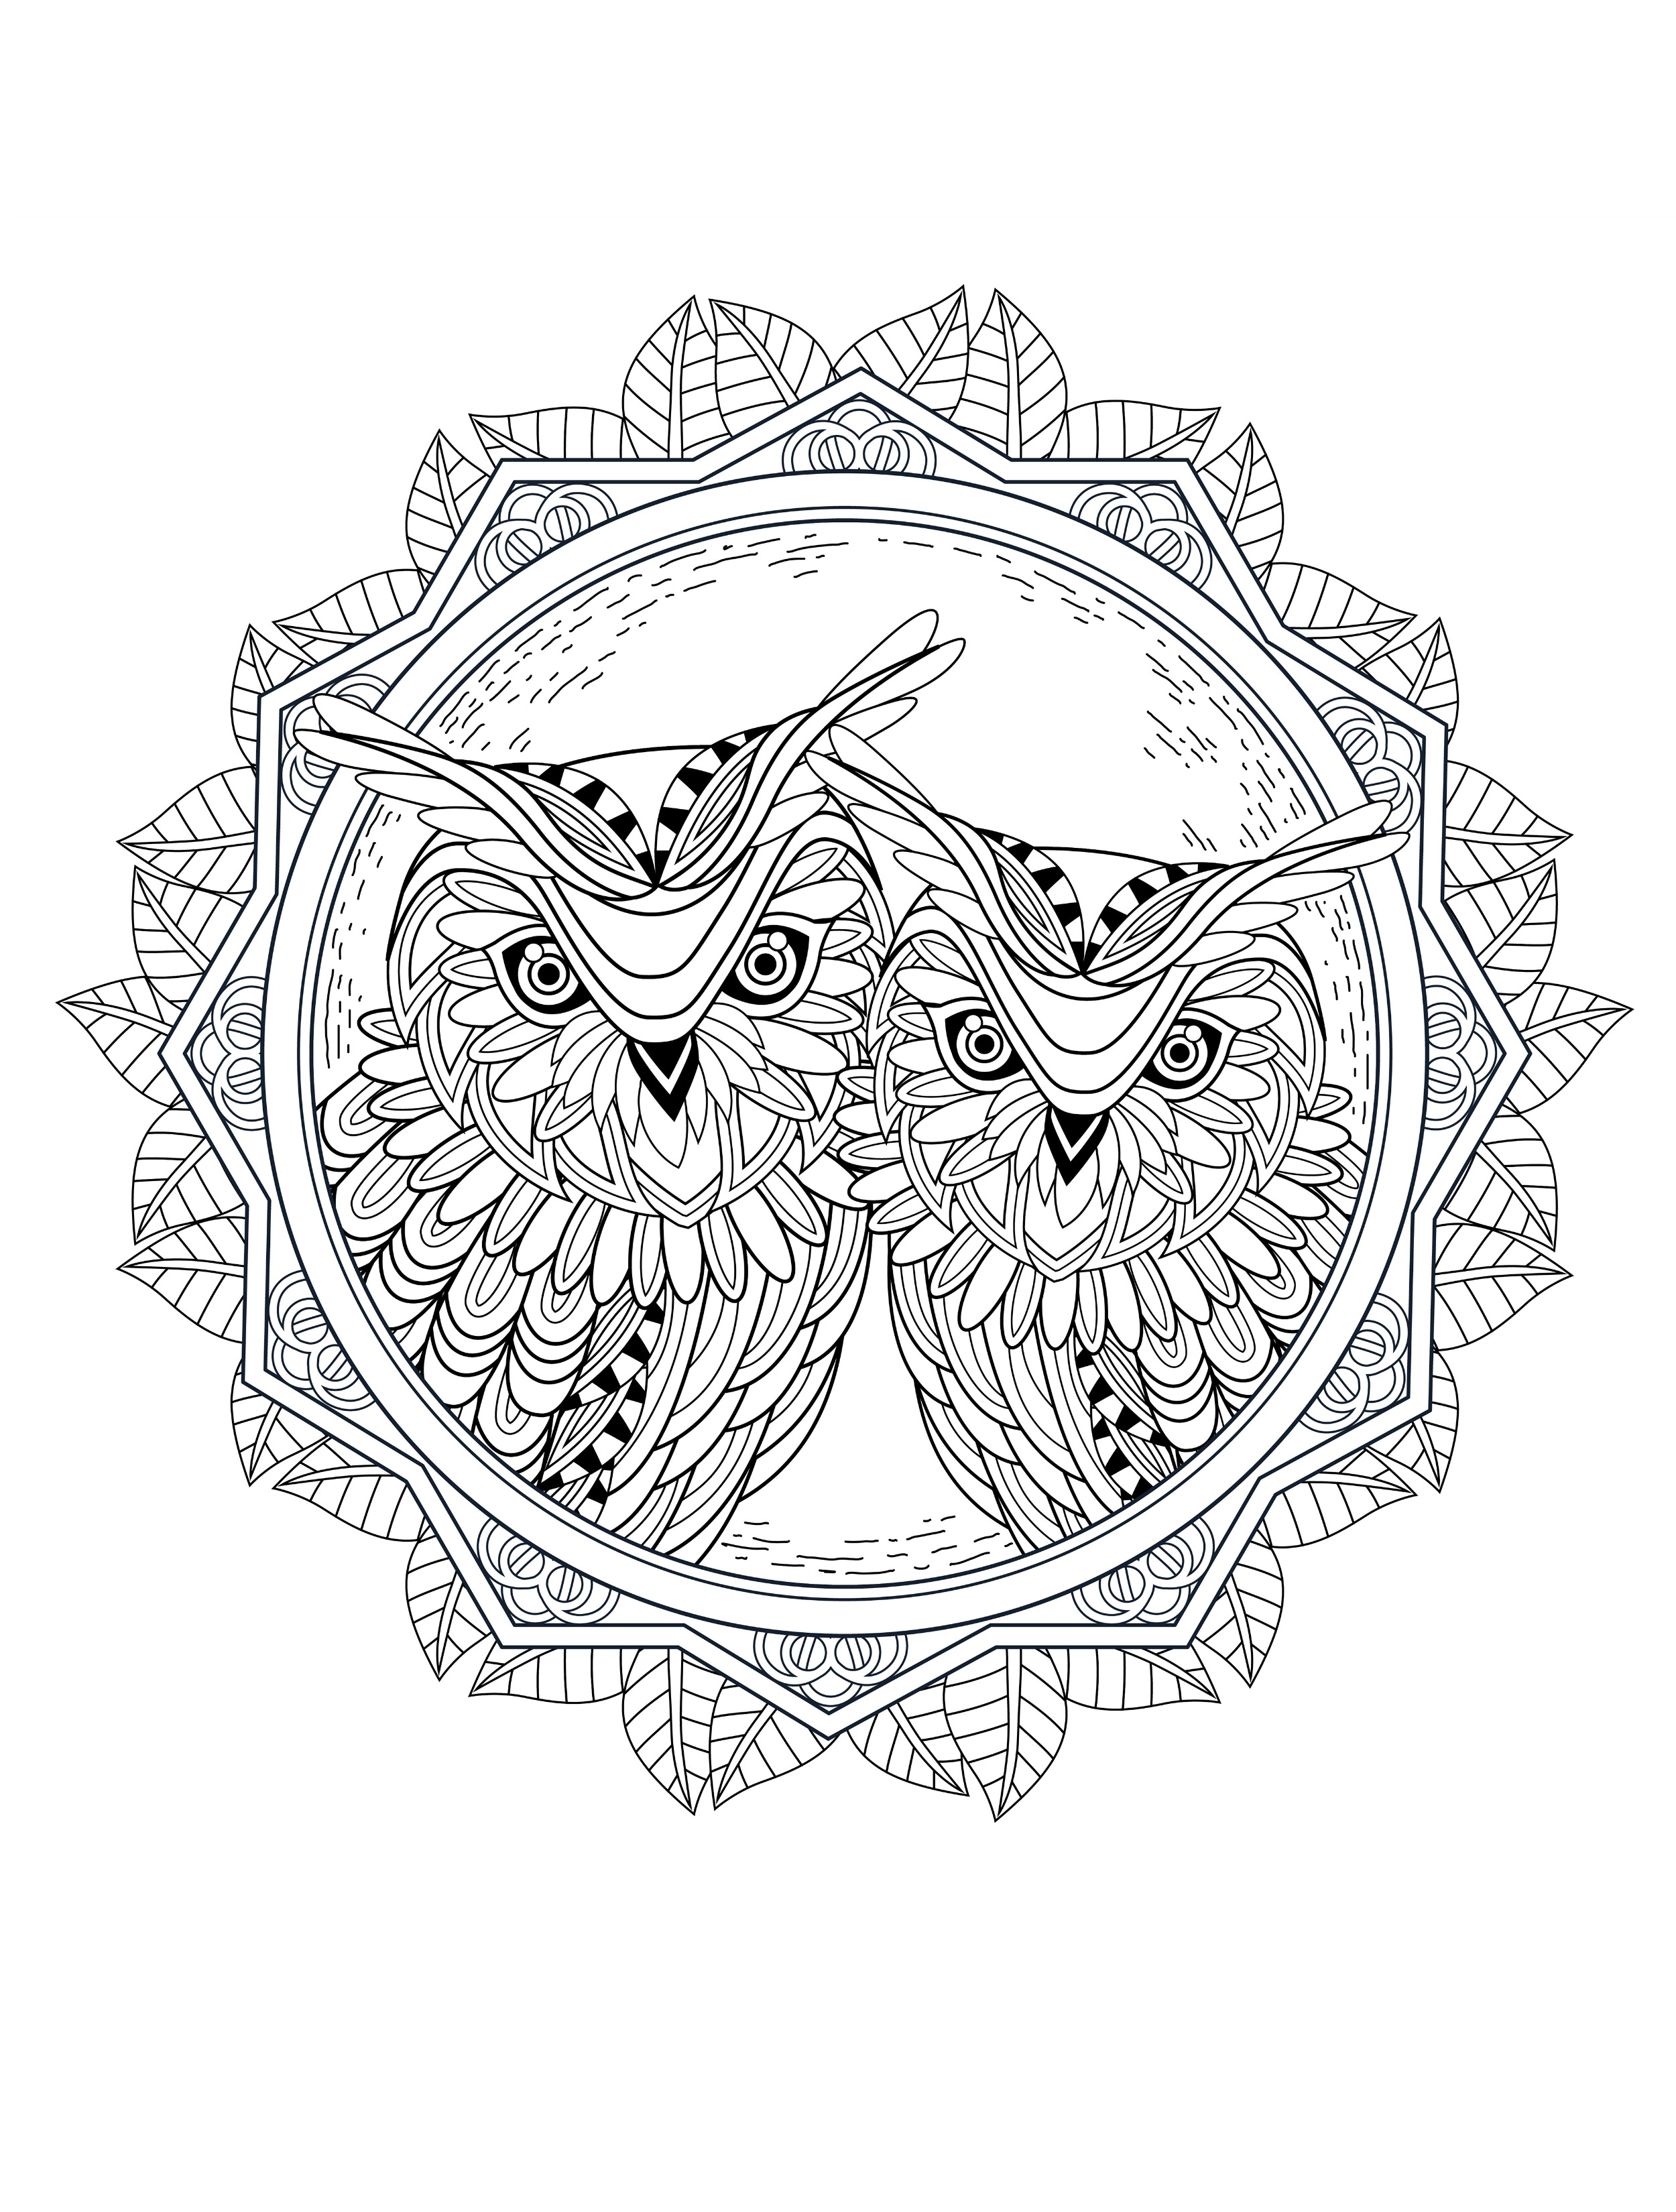 OWL Coloring Pages for Adults. Free Detailed Owl Coloring ...